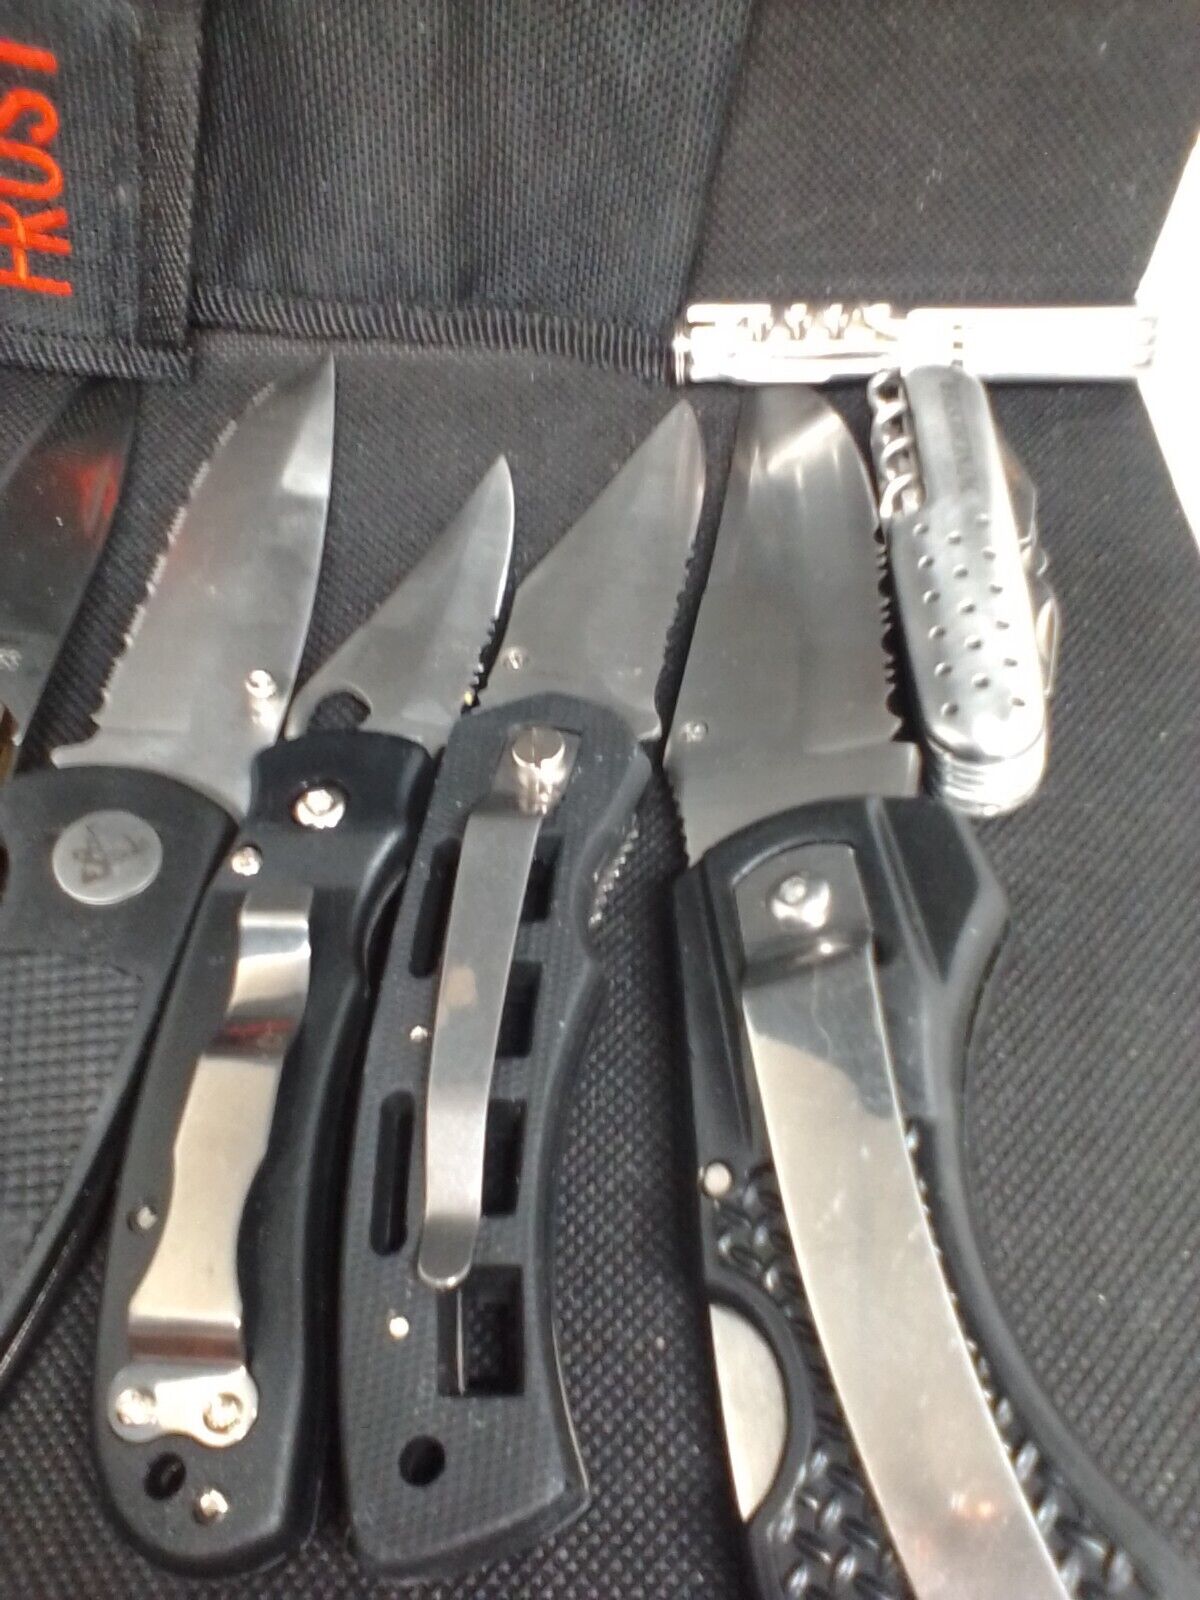 Pocket Knives Lot. 8 Knifes And 1 Compass Whistle